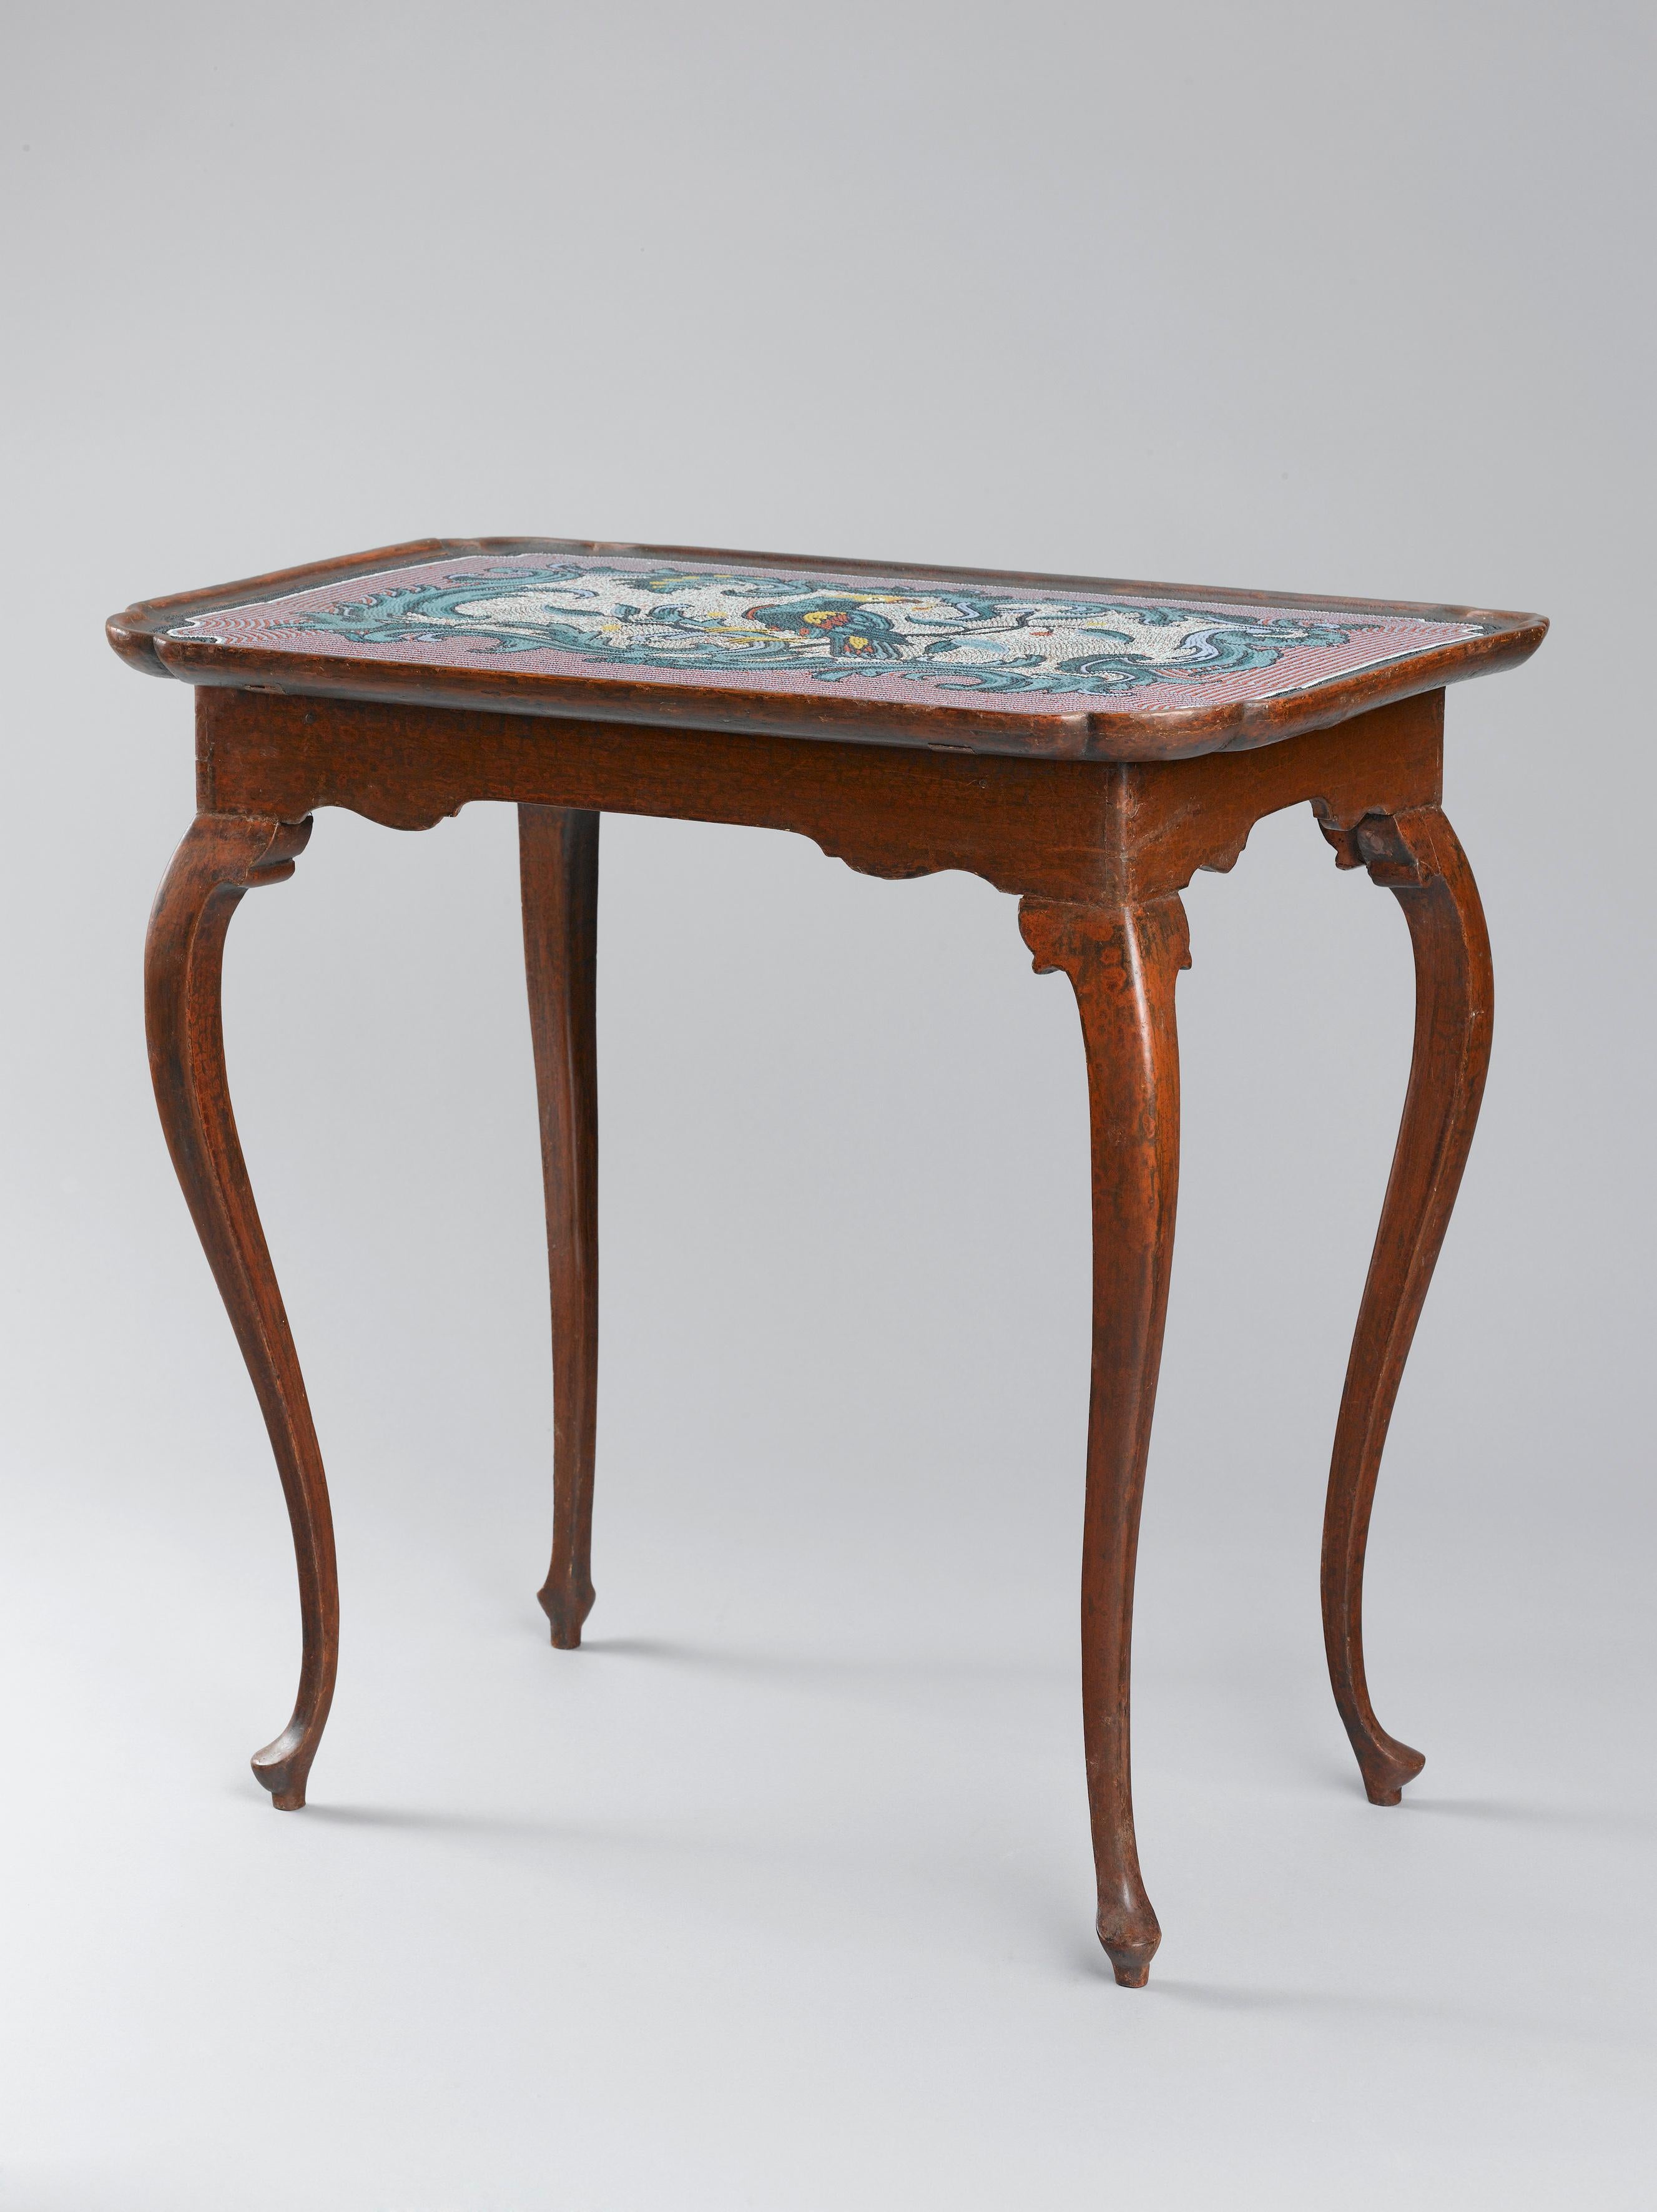 Oak and pine wood with historical paint and marbling. The rounded rectangular dished top with moulded edge and decorated with a mosaic made of glass beads depicting a parrot seated in a branch framed by scrolling foliage, above a plain frieze, on